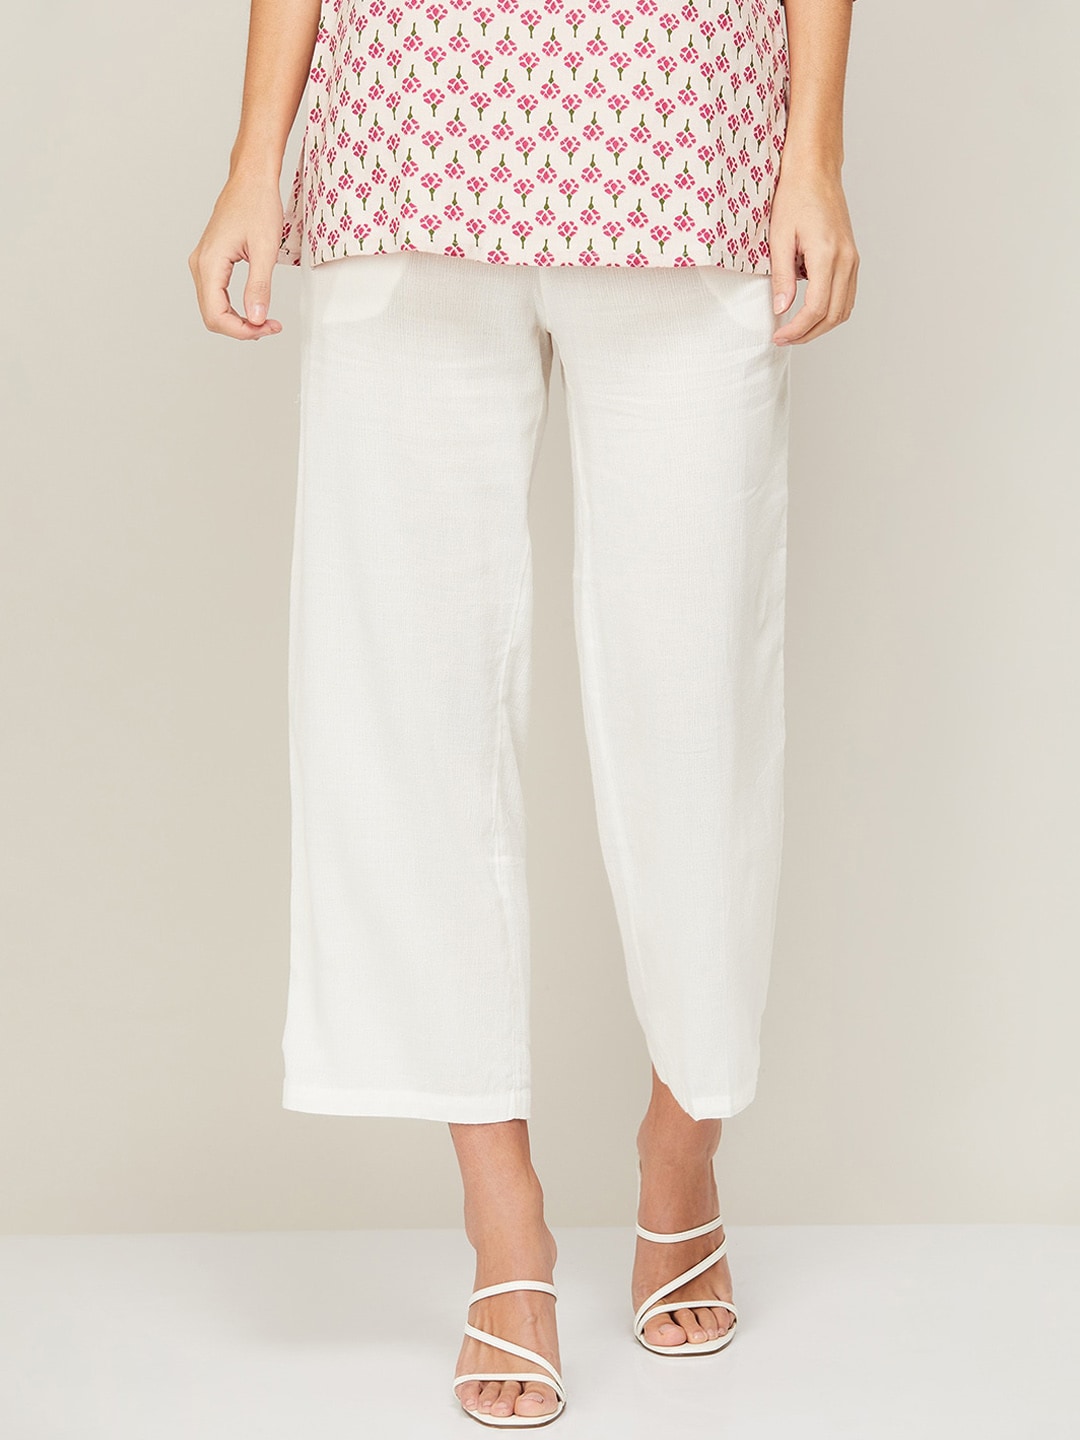 Melange by Lifestyle Women White Cotton Culottes Trousers Price in India